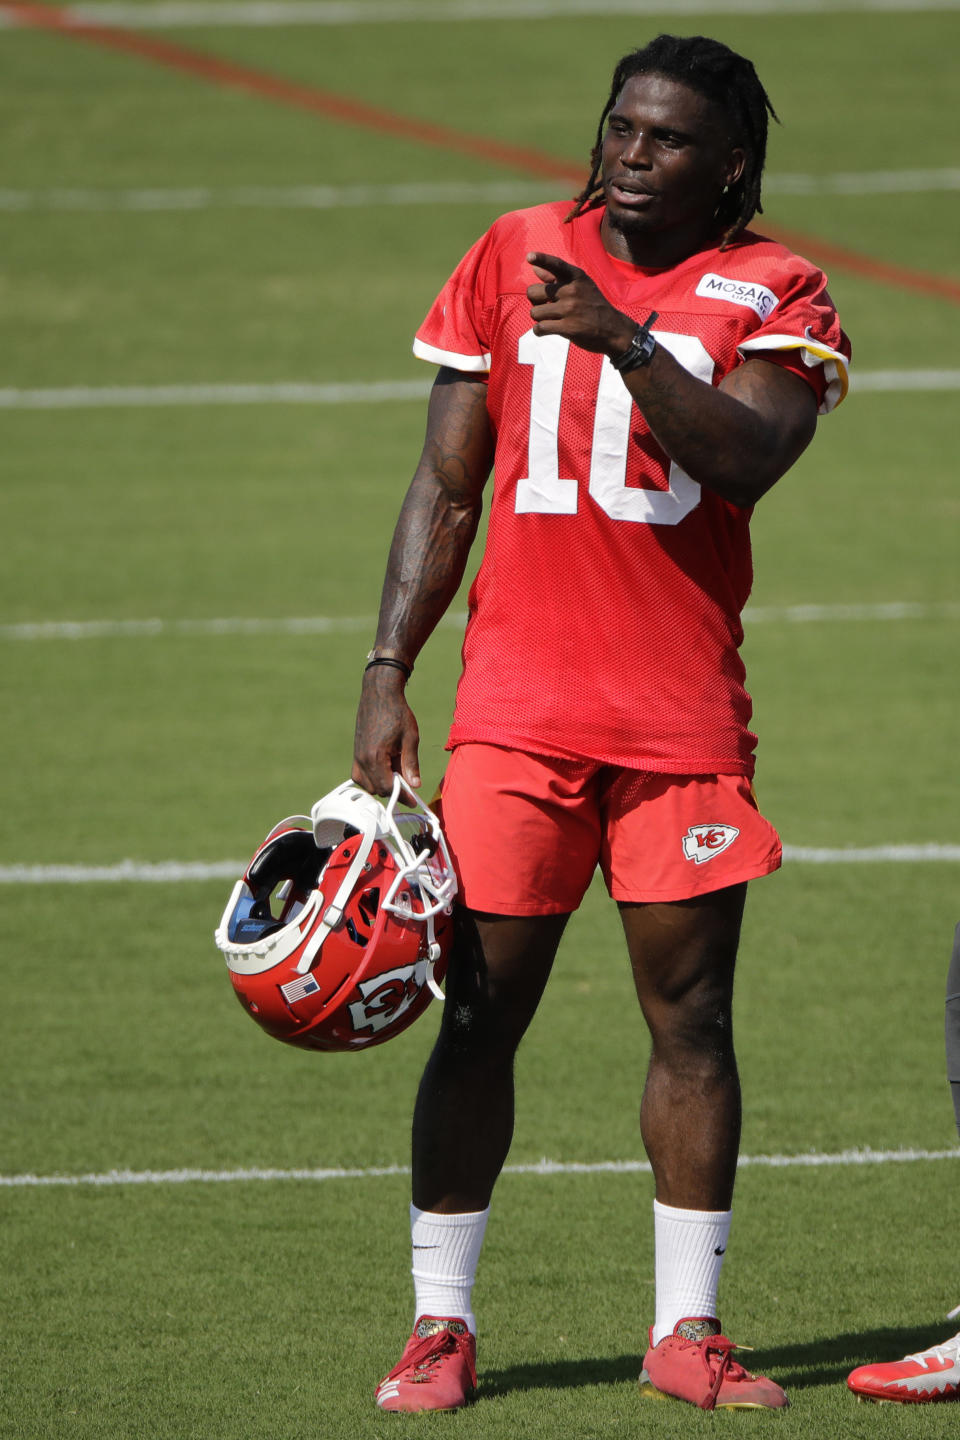 Kansas City Chiefs wide receiver Tyreek Hill motions to a teammate at NFL football training camp Saturday, July 27, 2019, in St. Joseph, Mo. (AP Photo/Charlie Riedel)